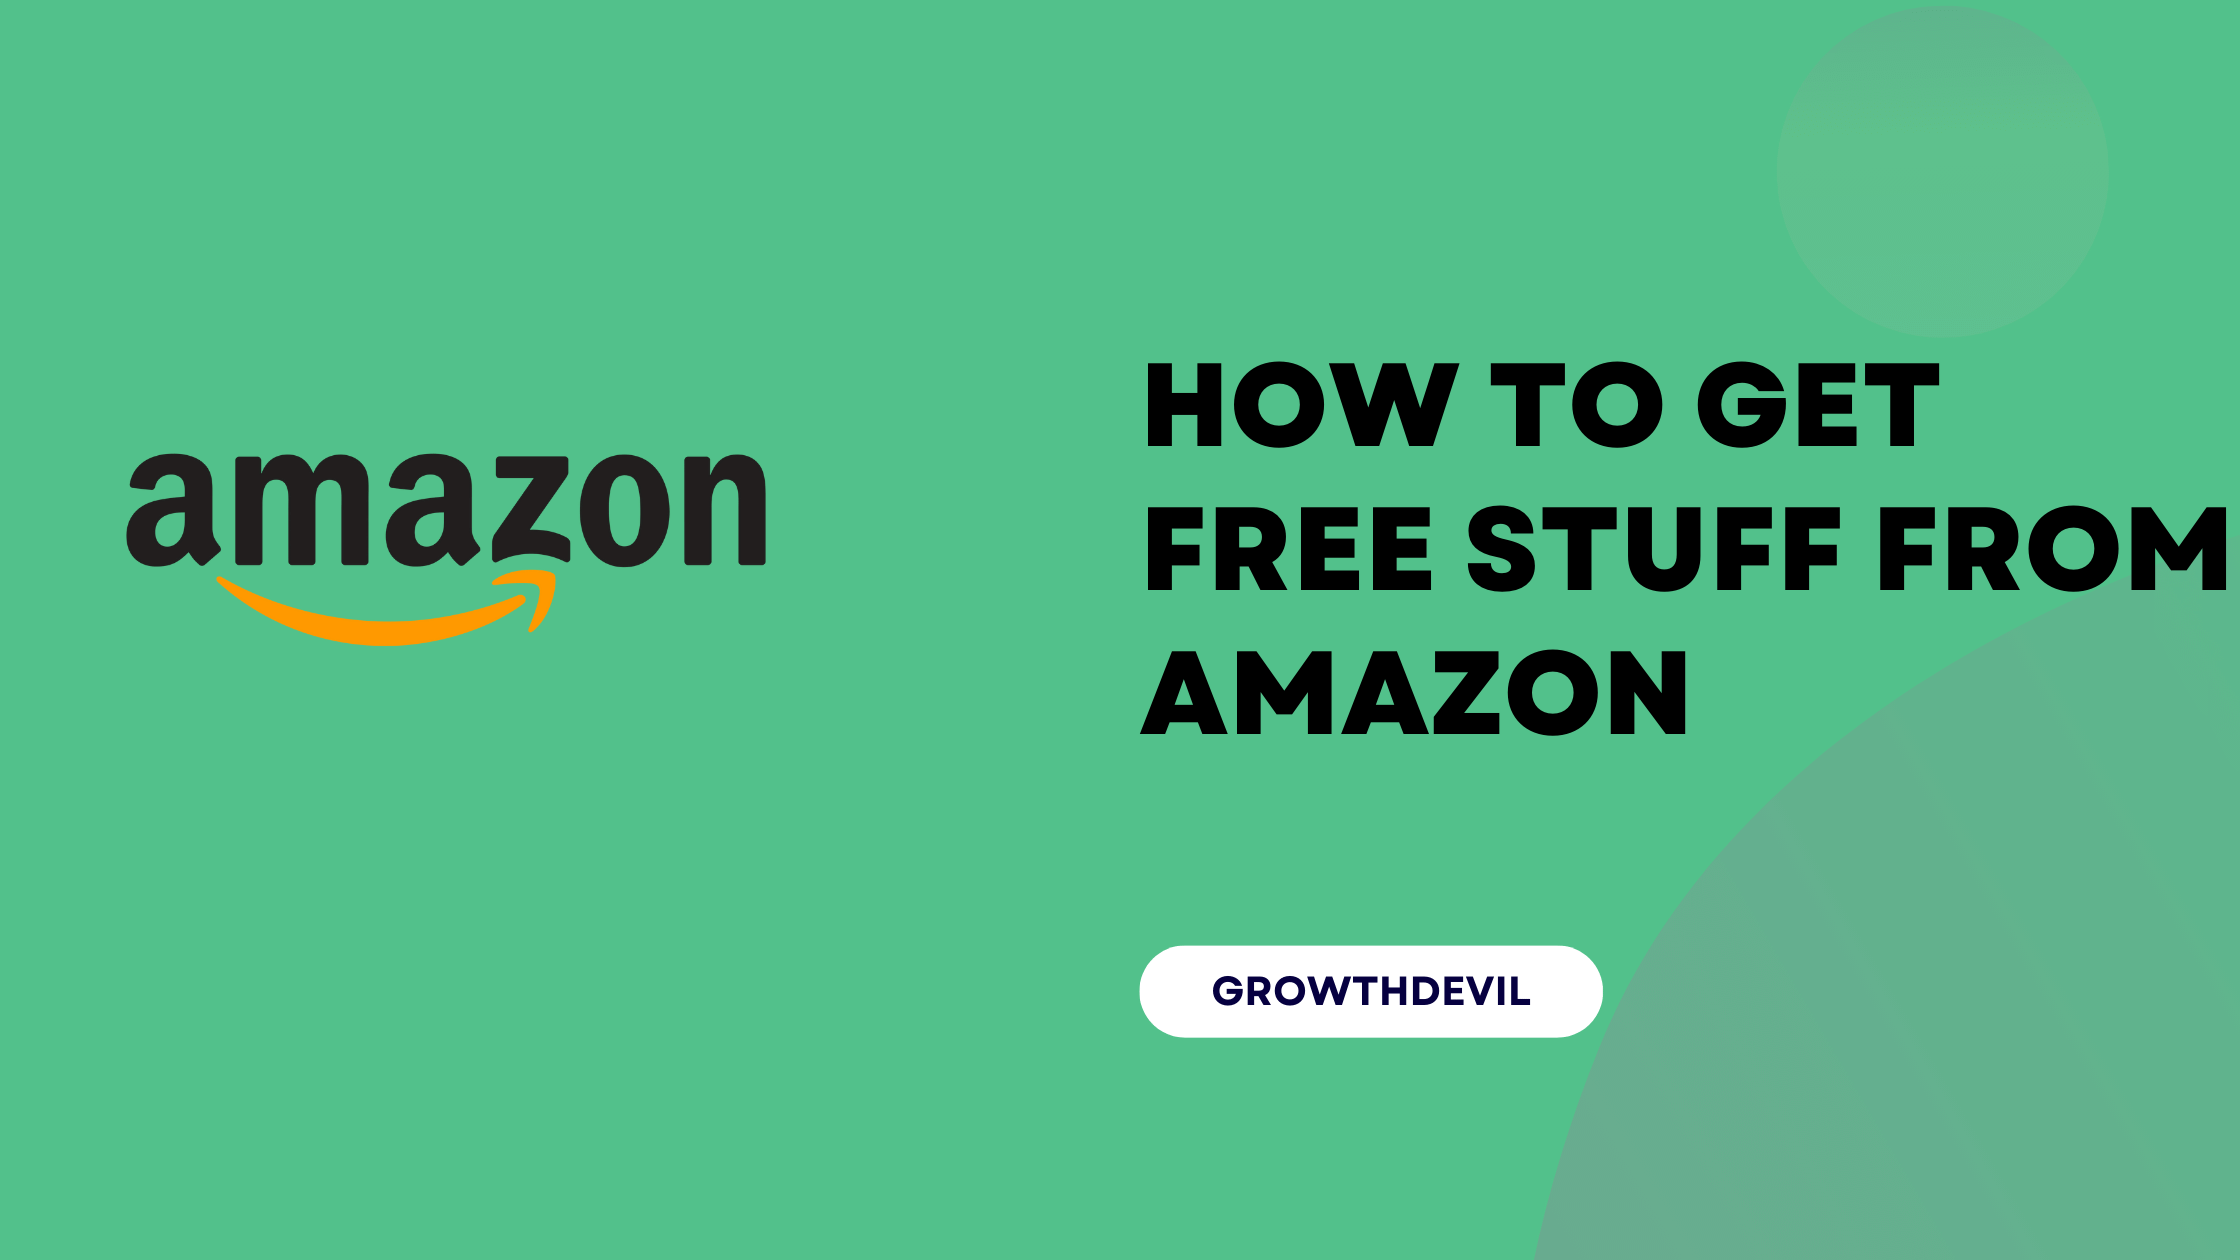 How To Get Free Stuff From Amazon - GrowthDevil